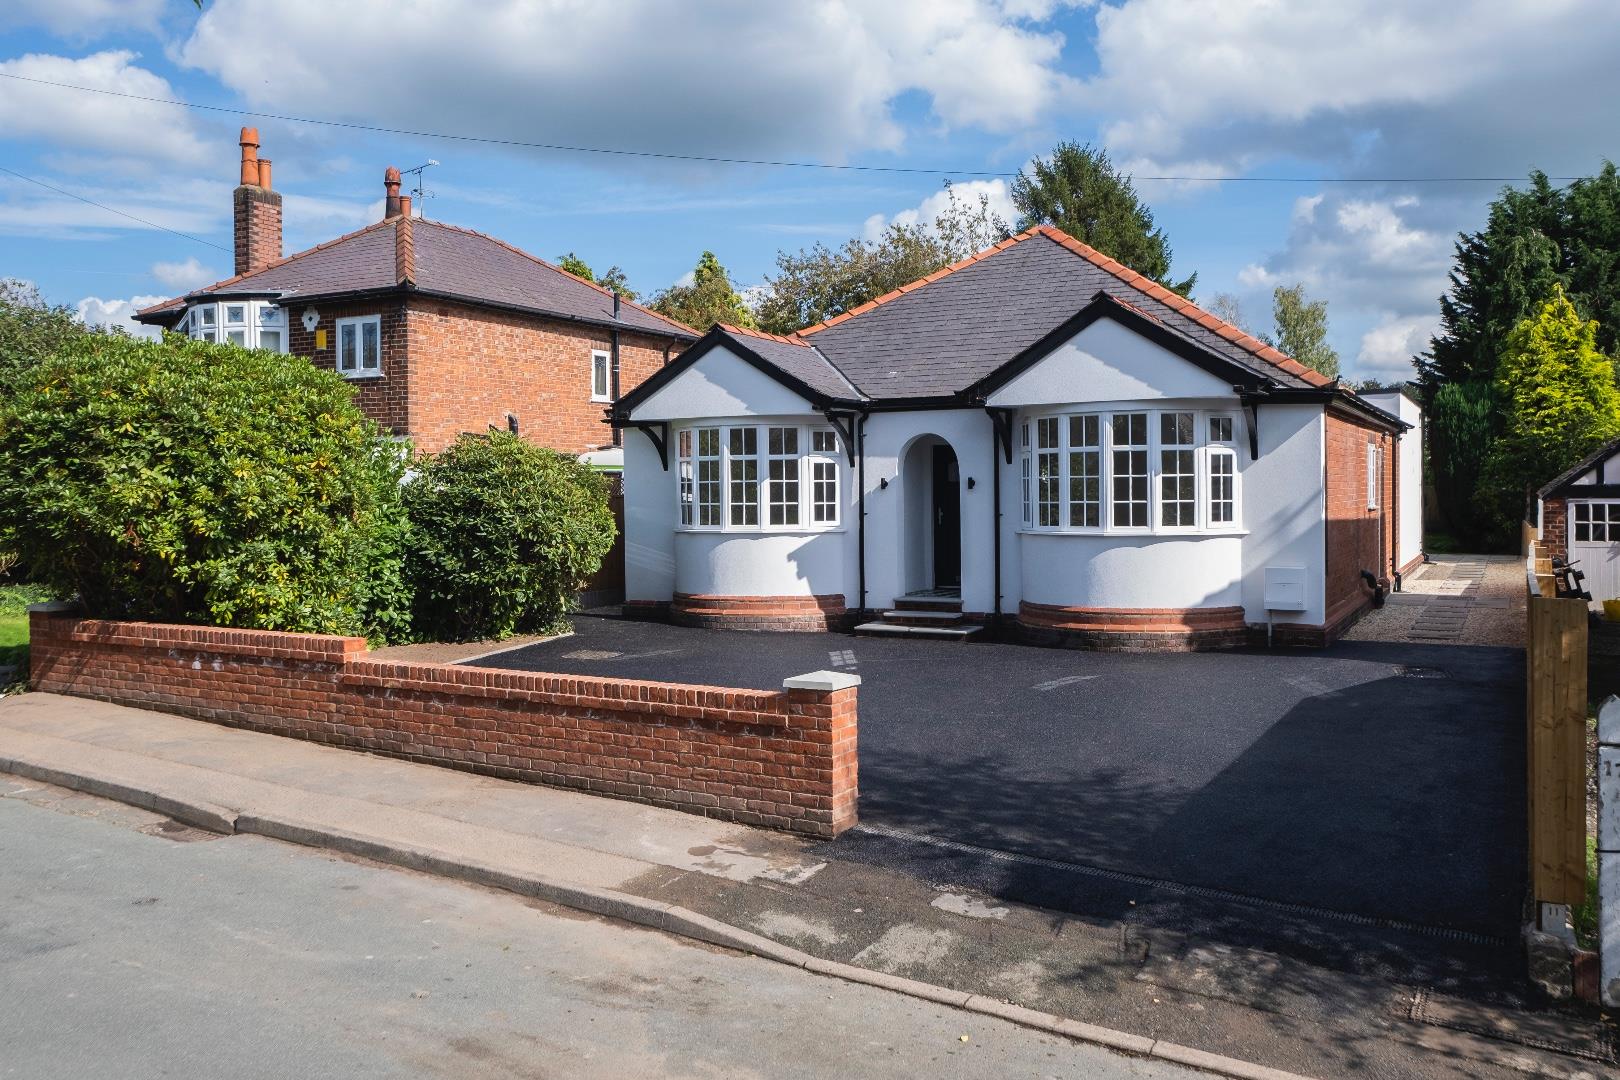 4 bedroom  Detached Bungalow for Sale in Great Boughton